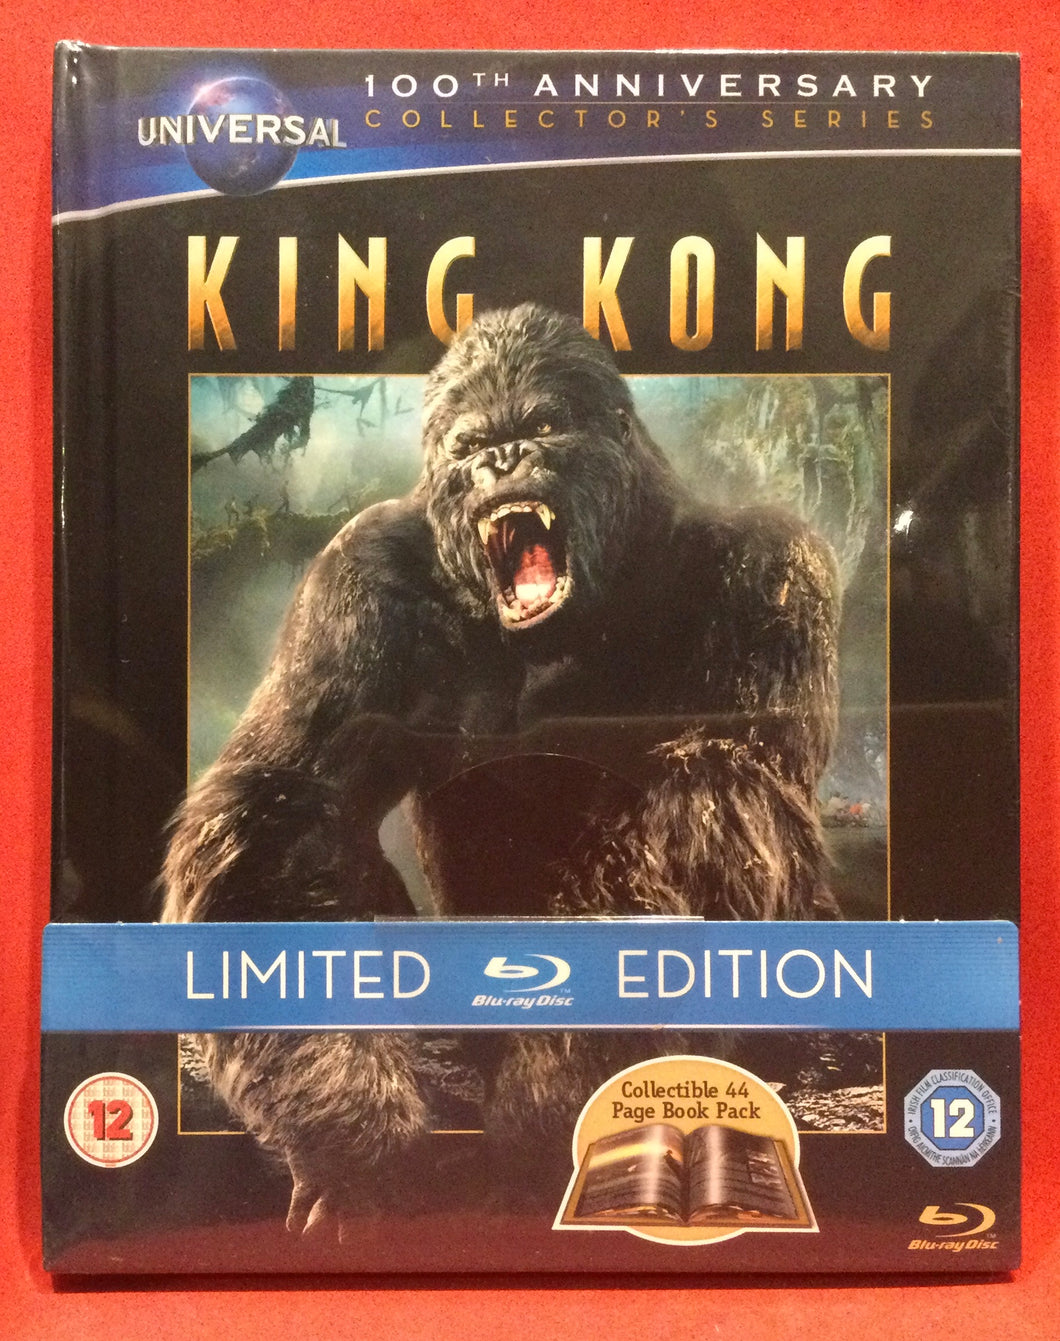 KING KONG - COLLECTABLE 44 PAGE BOOK PACK - LIMITED EDITION - BLU-RAY (SEALED)